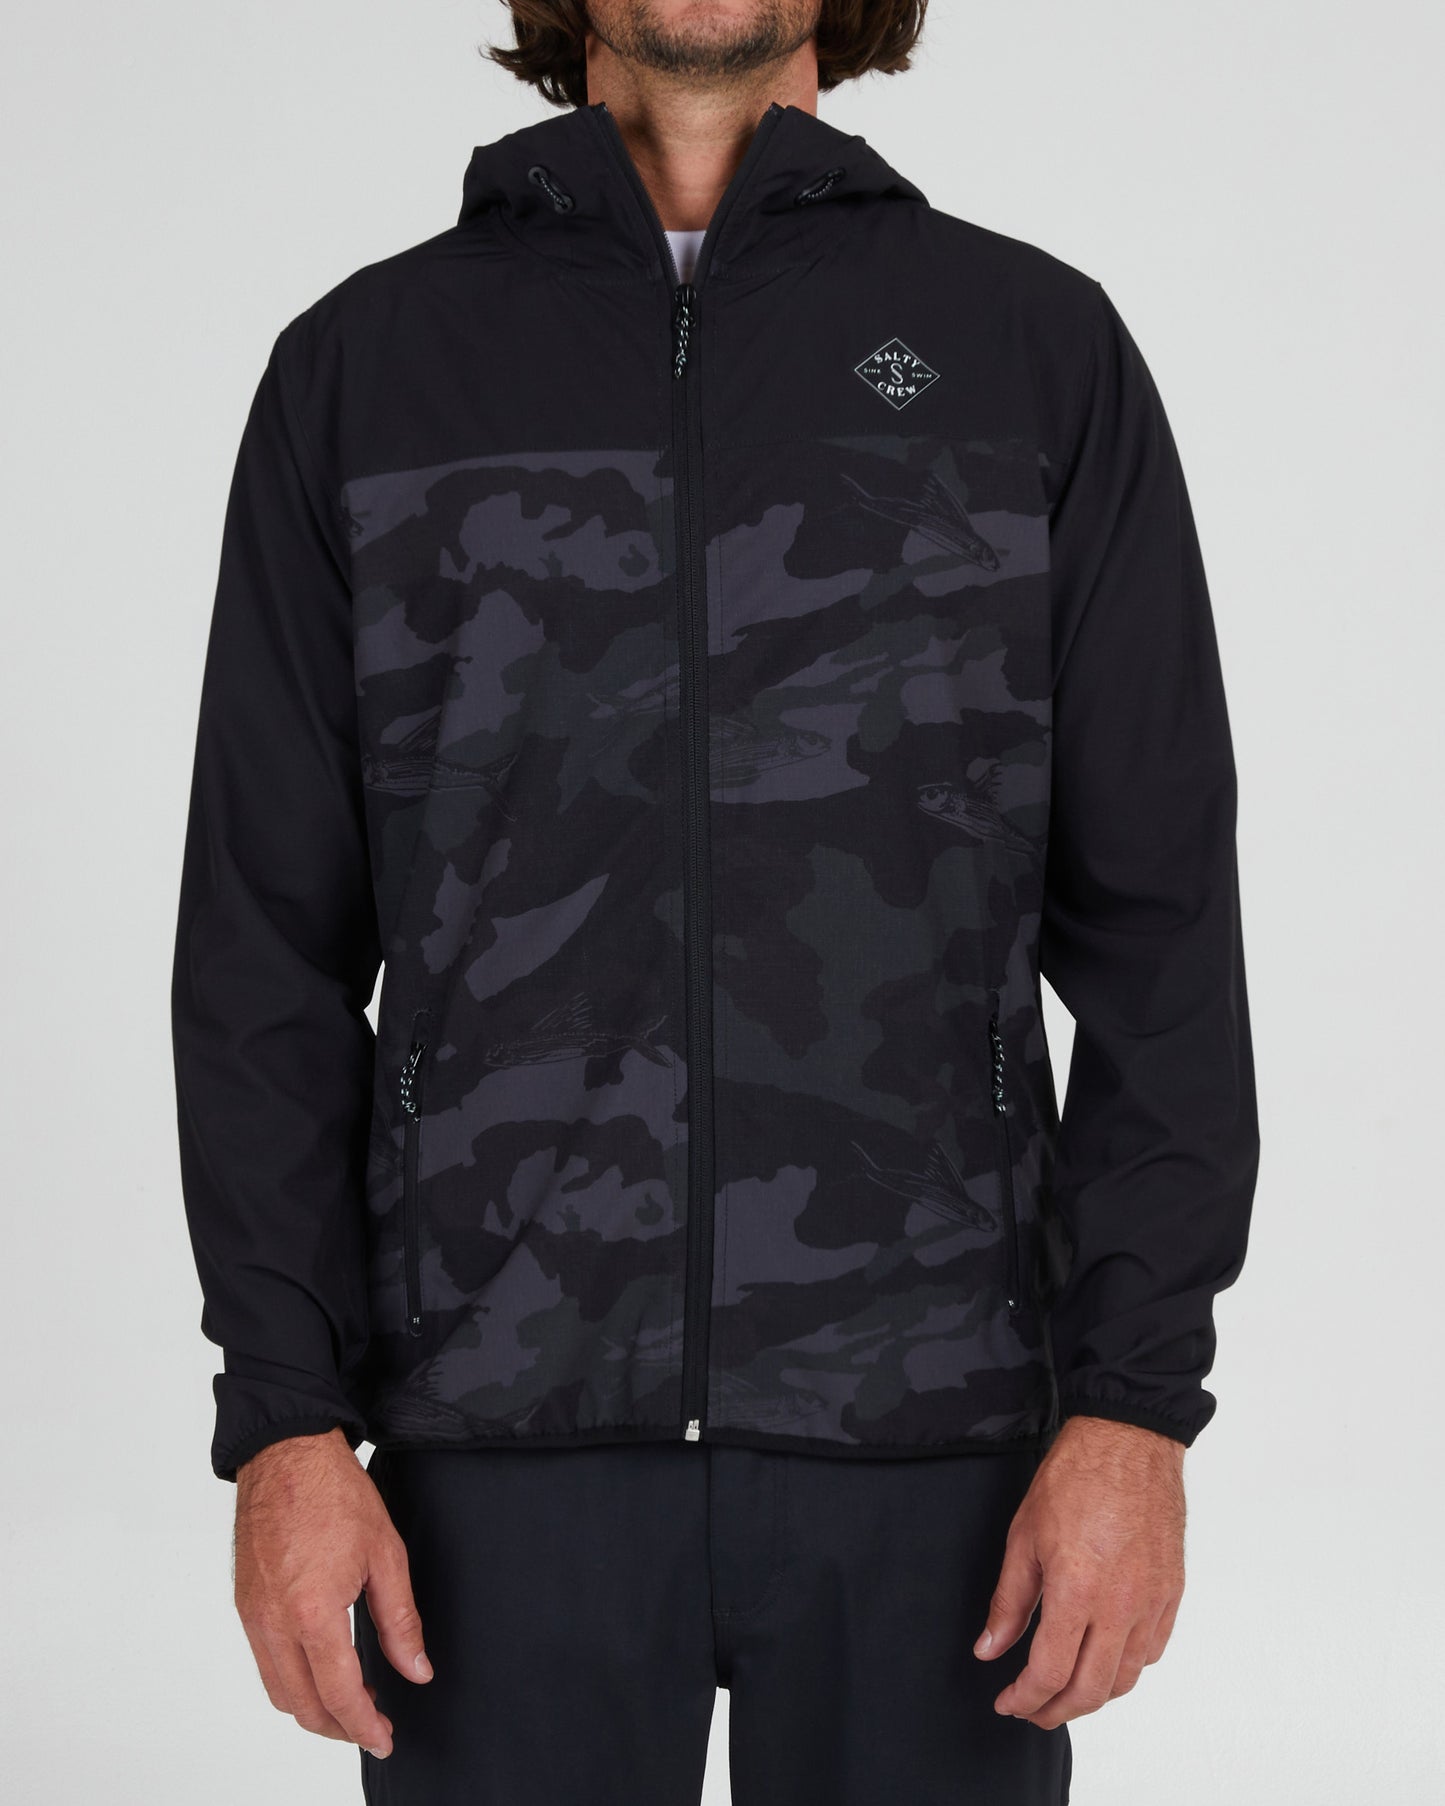 on body front of the Stowaway Black Camo Jacket